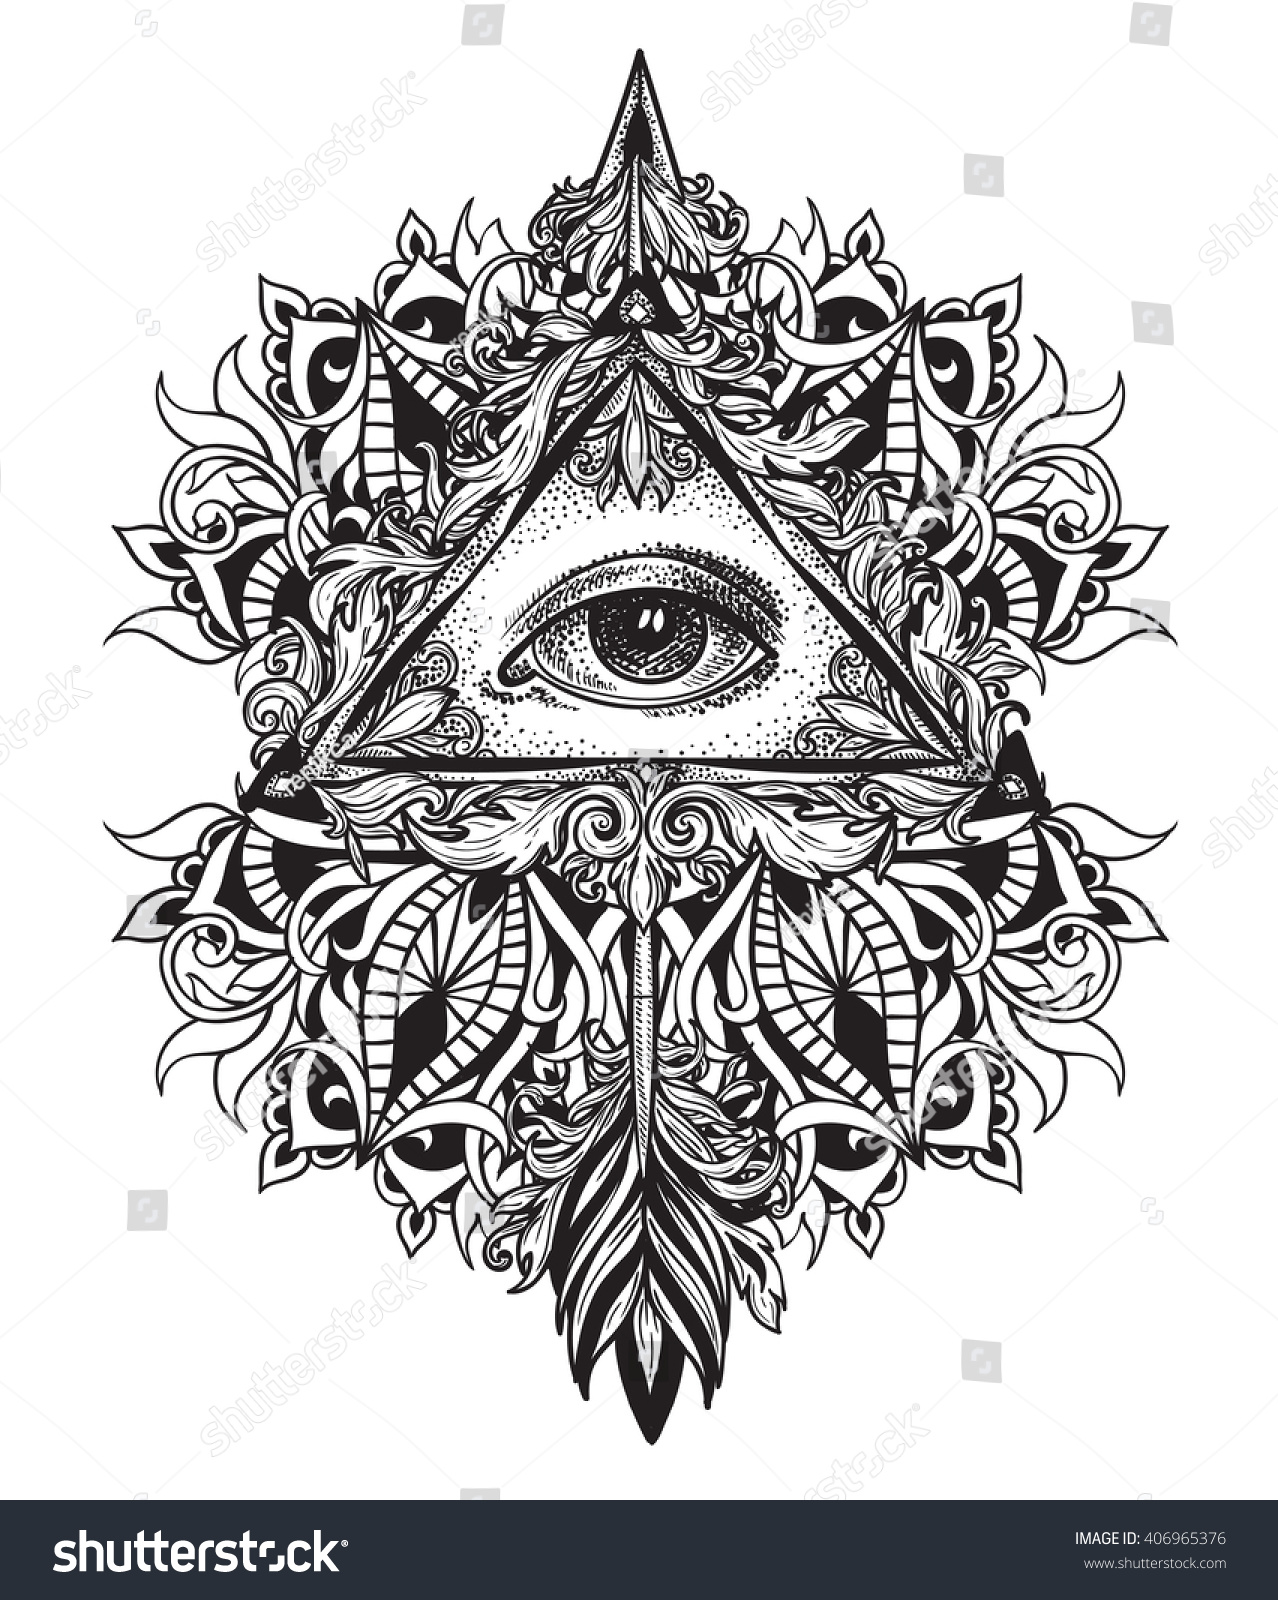 All-Seeing Eye As A Symbol Of The Mystical Science Of Alchemy And The ...